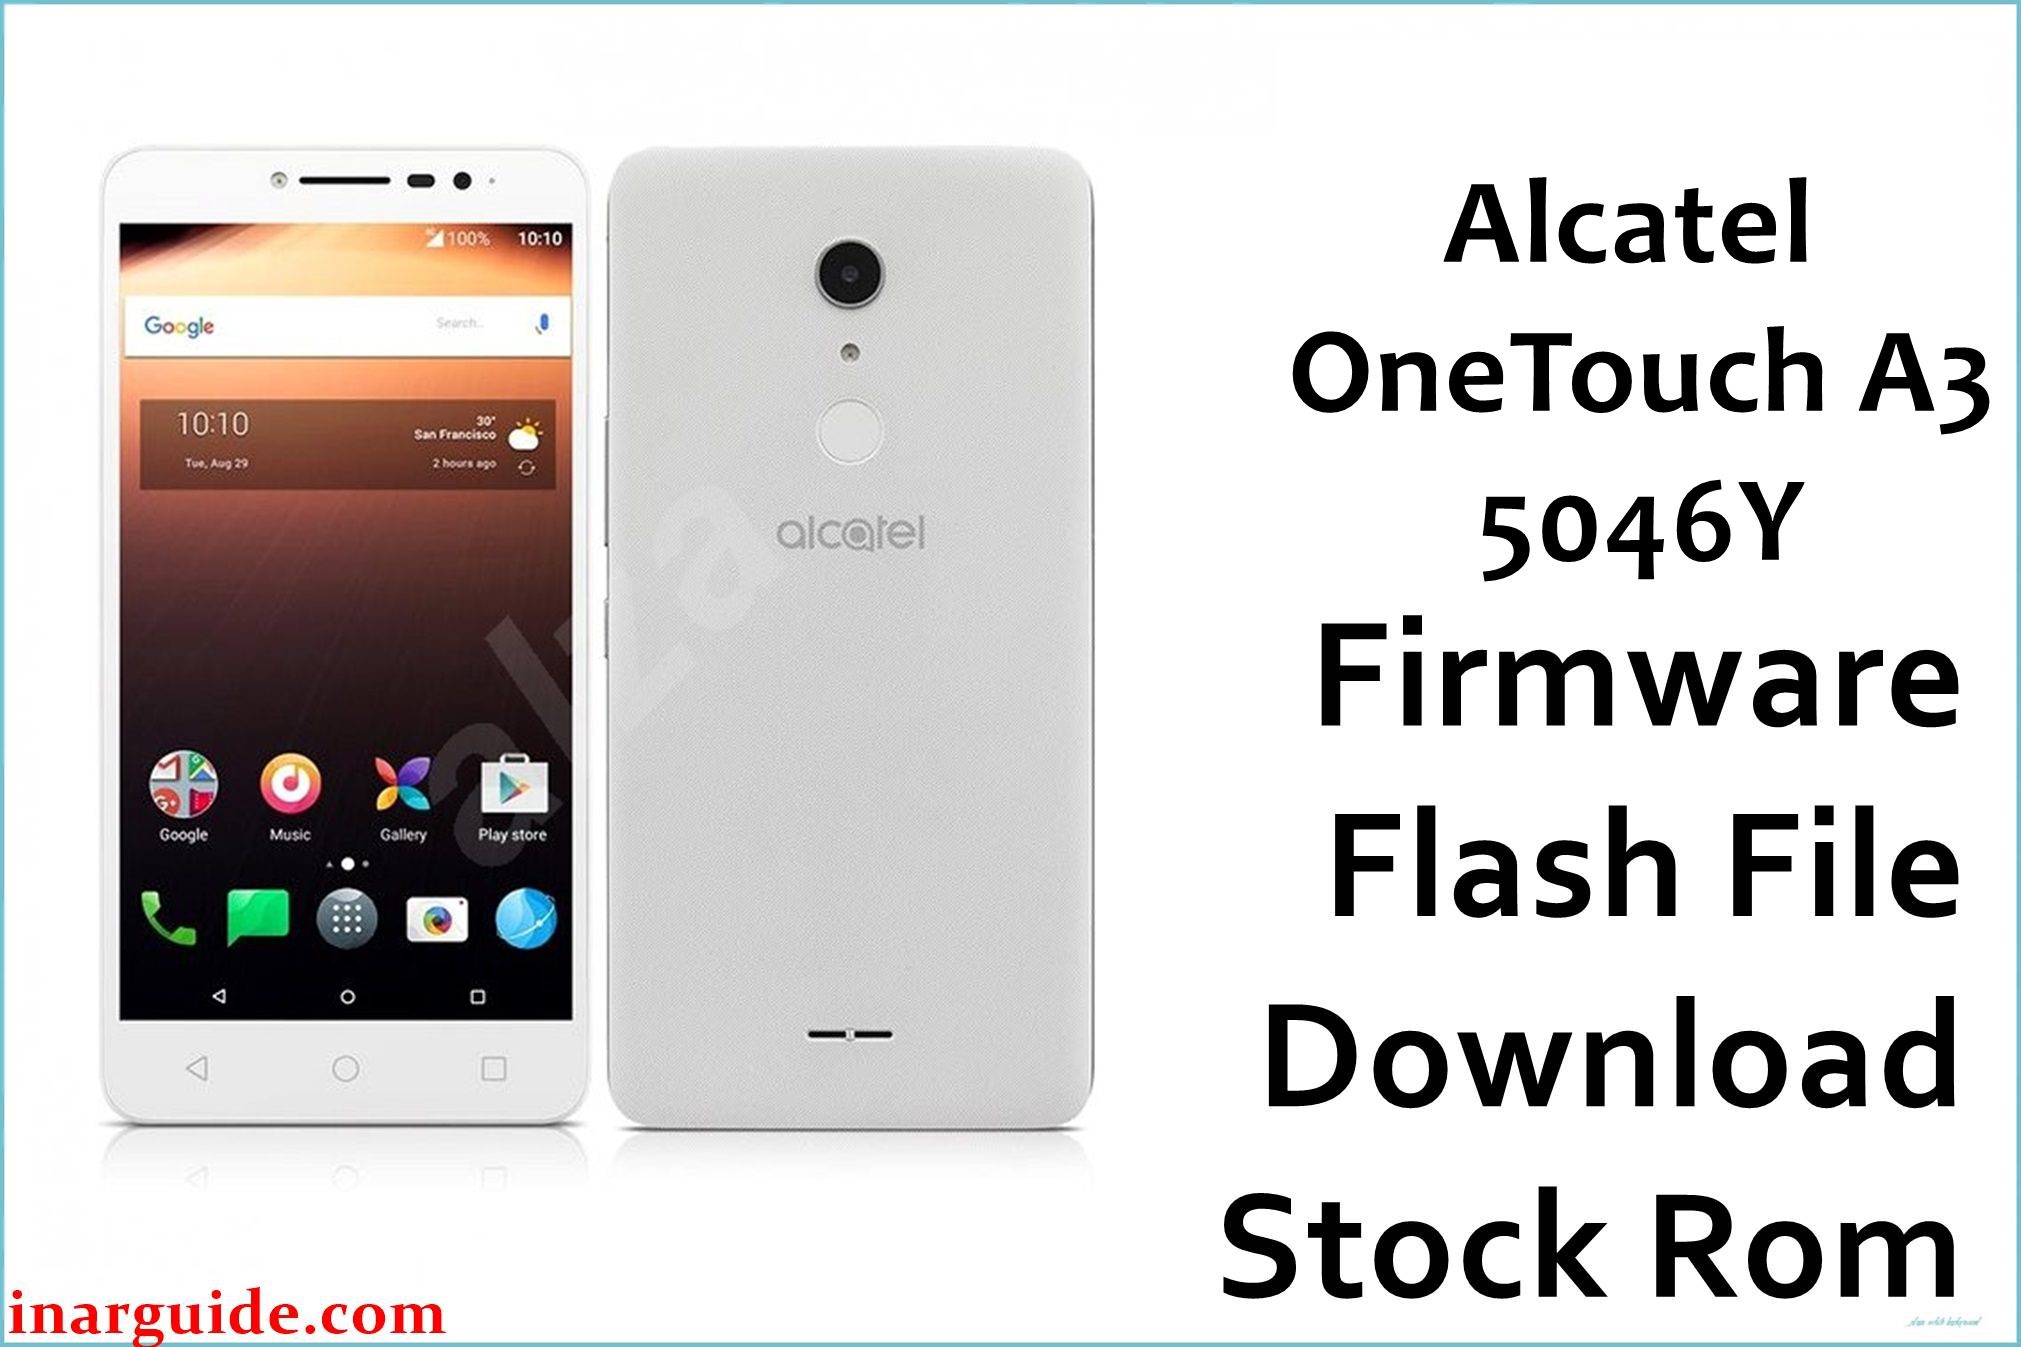 Alcatel OneTouch A3 5046Y